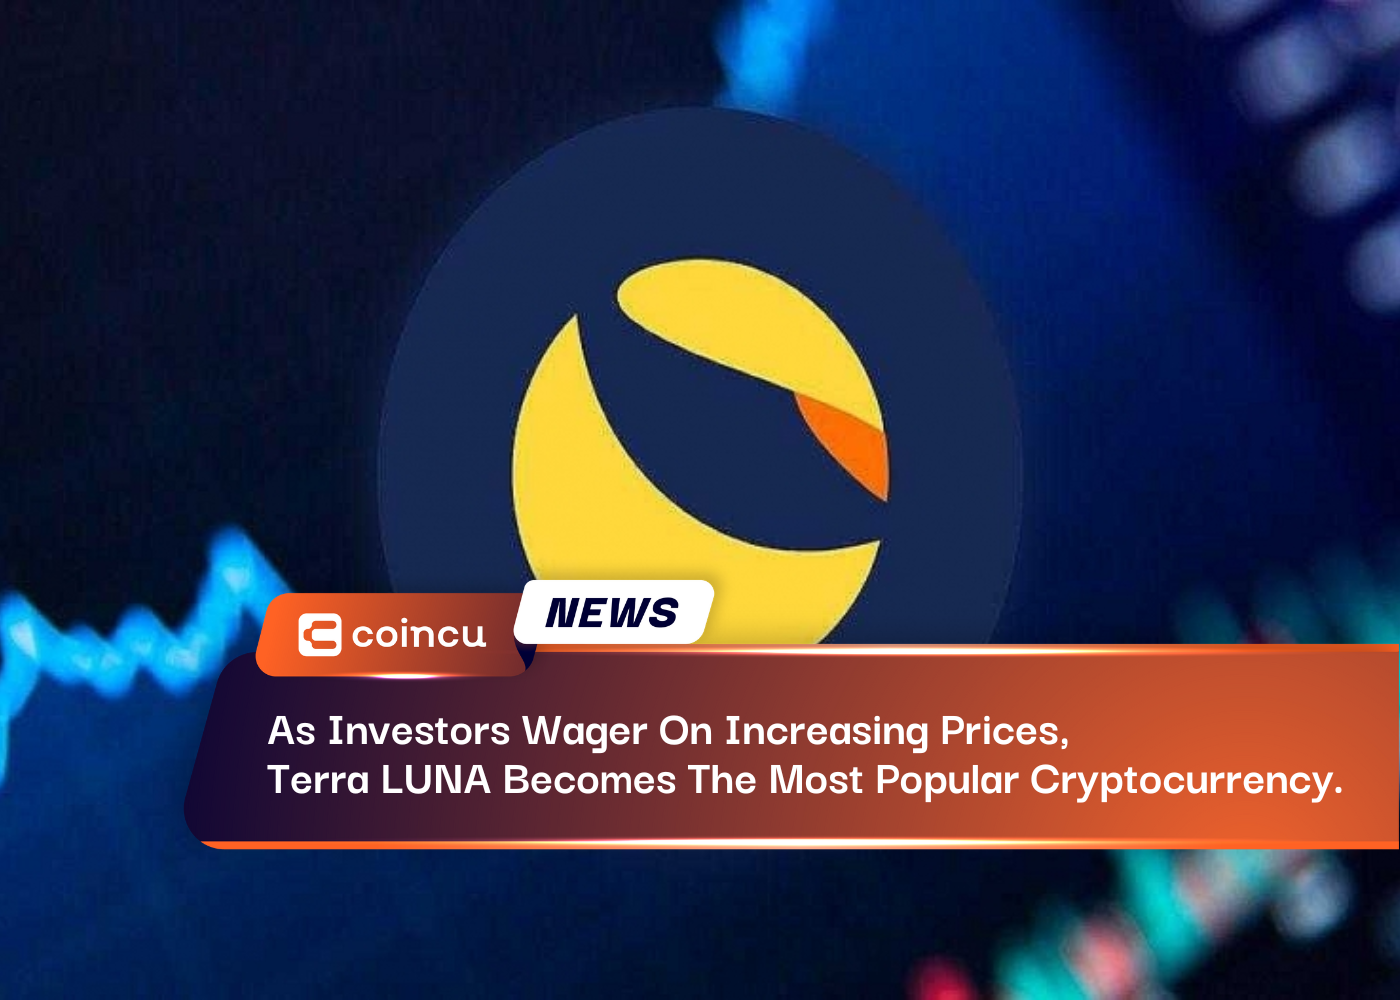 As Investors Wager On Increasing Prices, Terra LUNA Becomes The Most Popular Cryptocurrency.